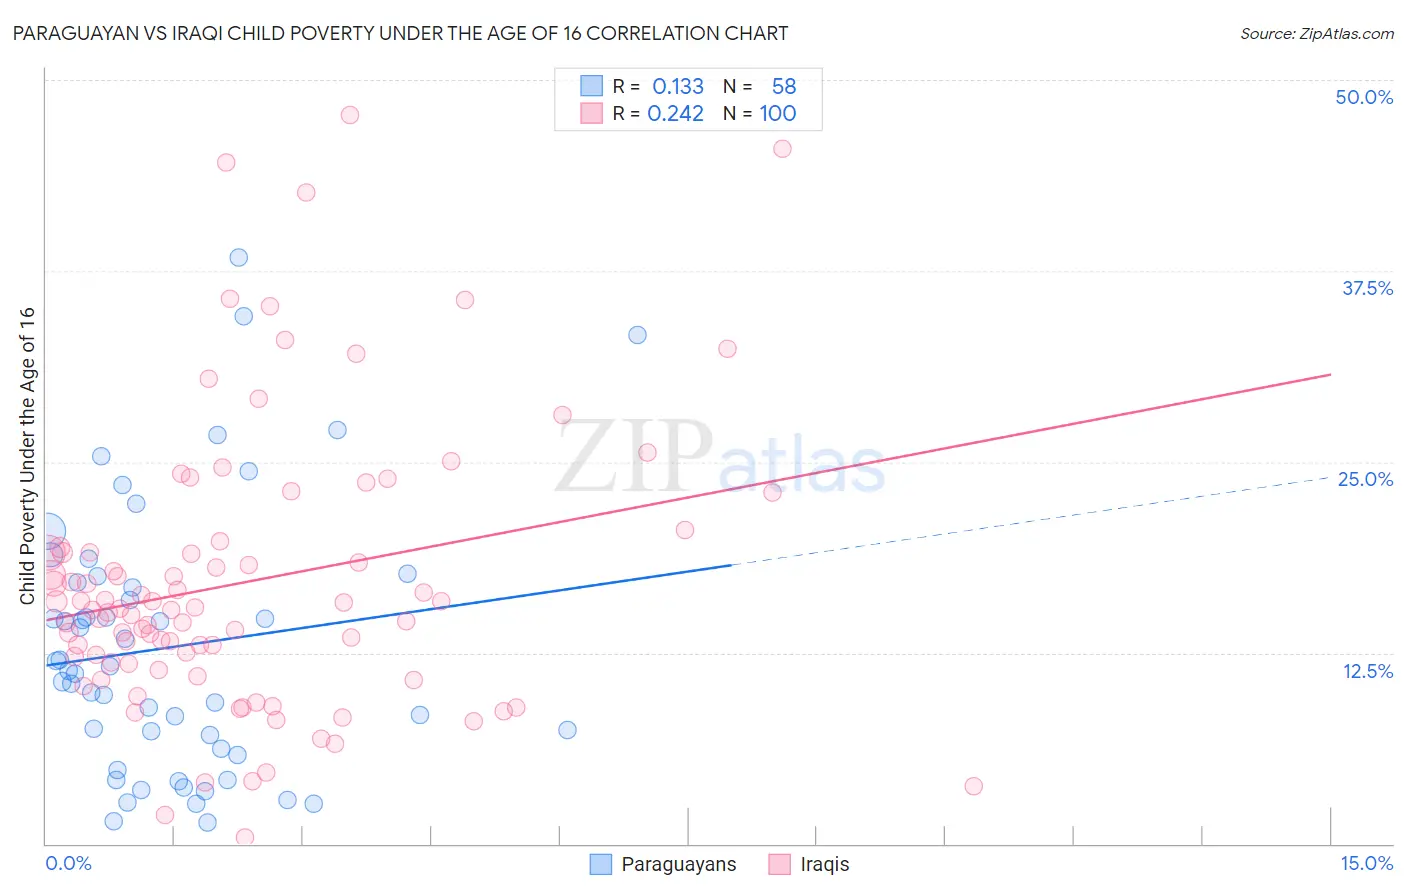 Paraguayan vs Iraqi Child Poverty Under the Age of 16